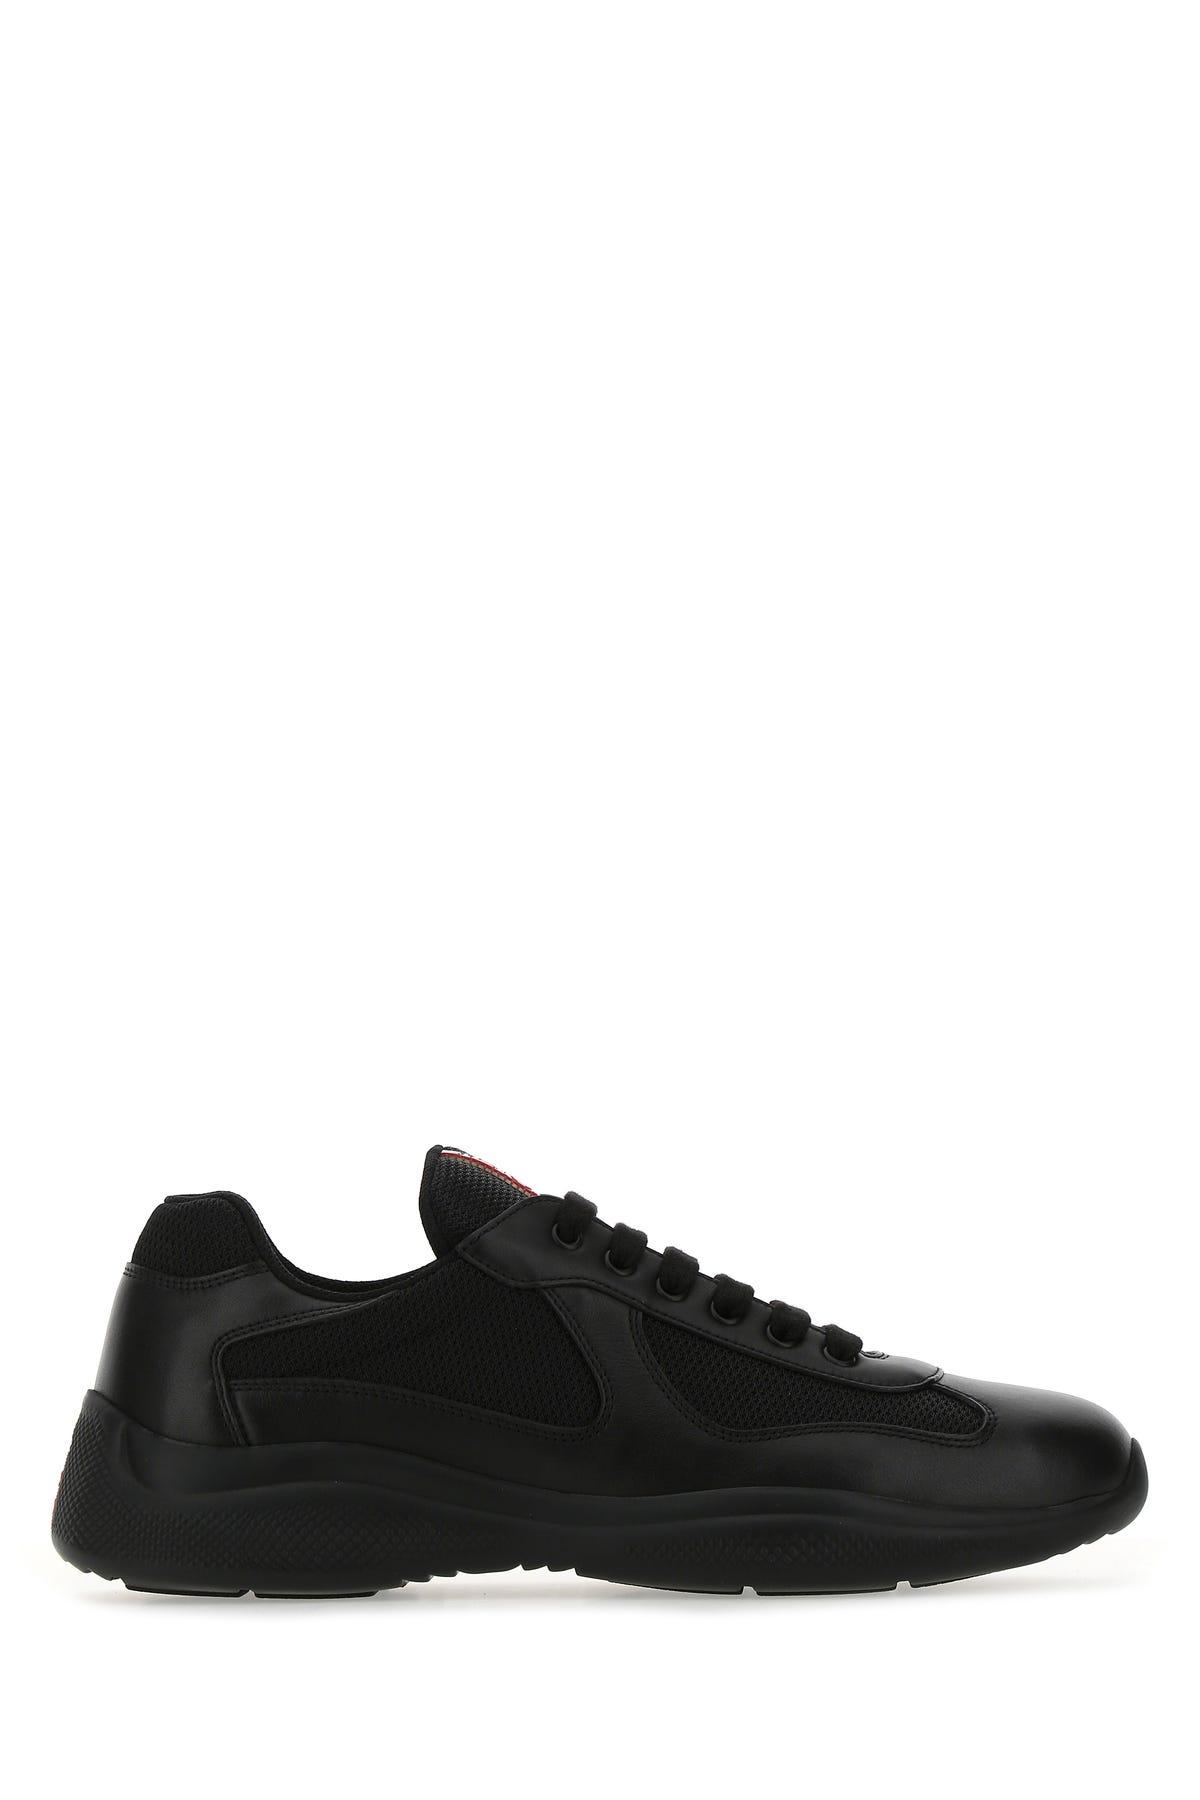 Prada America's Cup Patent Leather & Technical Fabric Sneakers in Black for  Men | Lyst